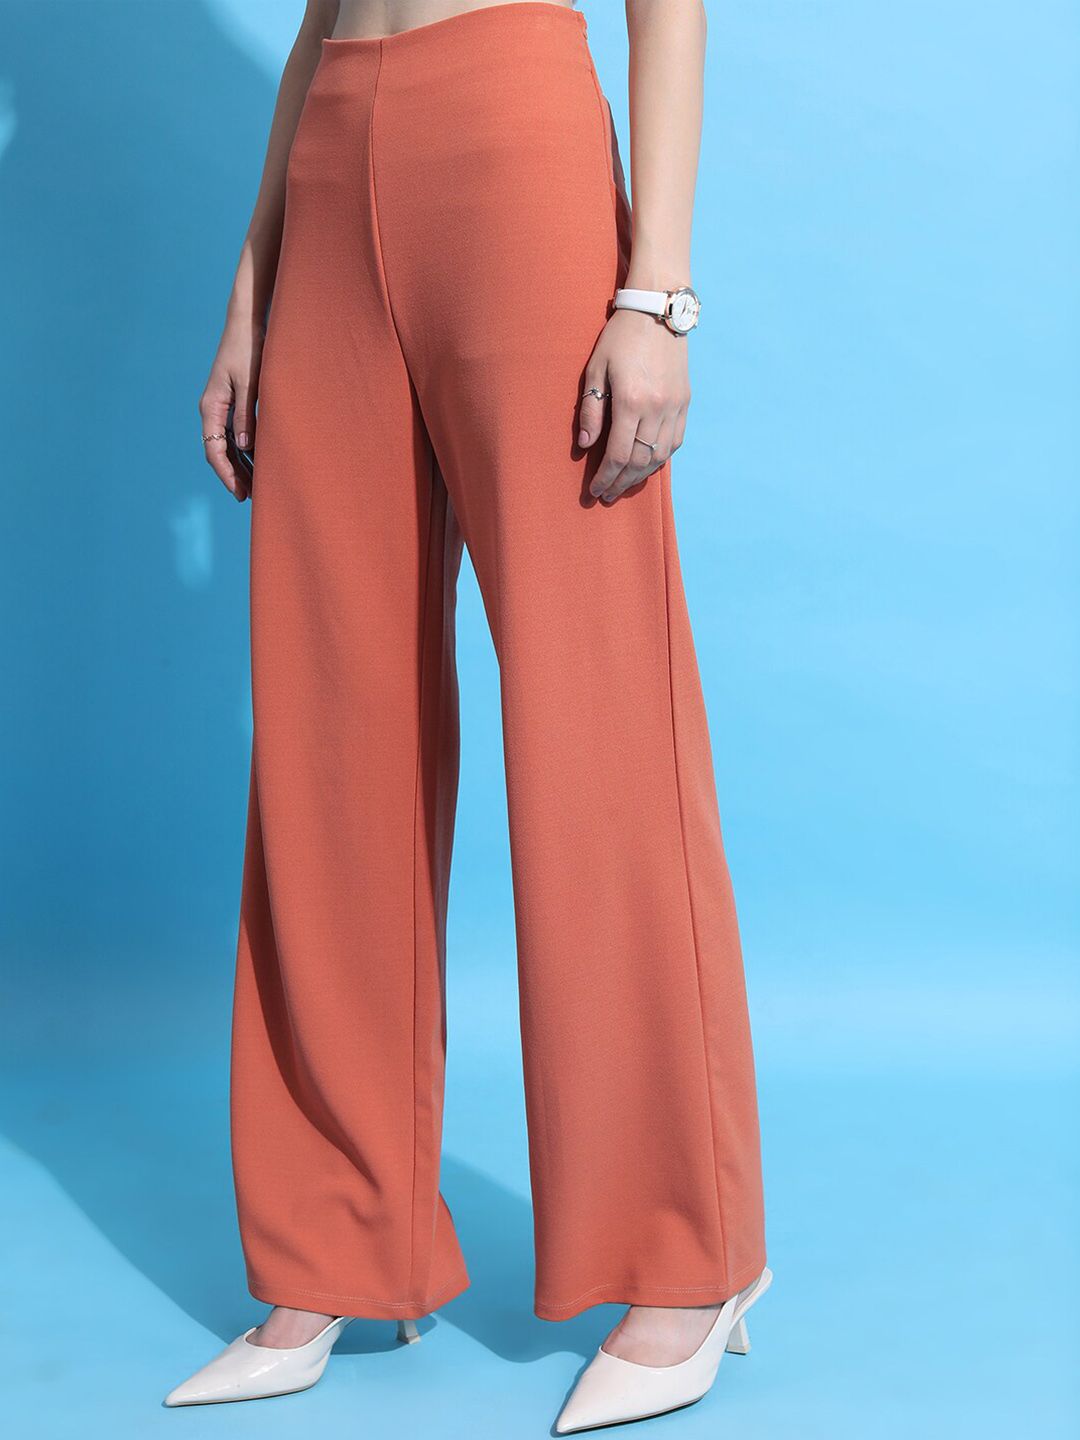 Womens - Bottoms - Flares, Bellbottoms & Parallels 